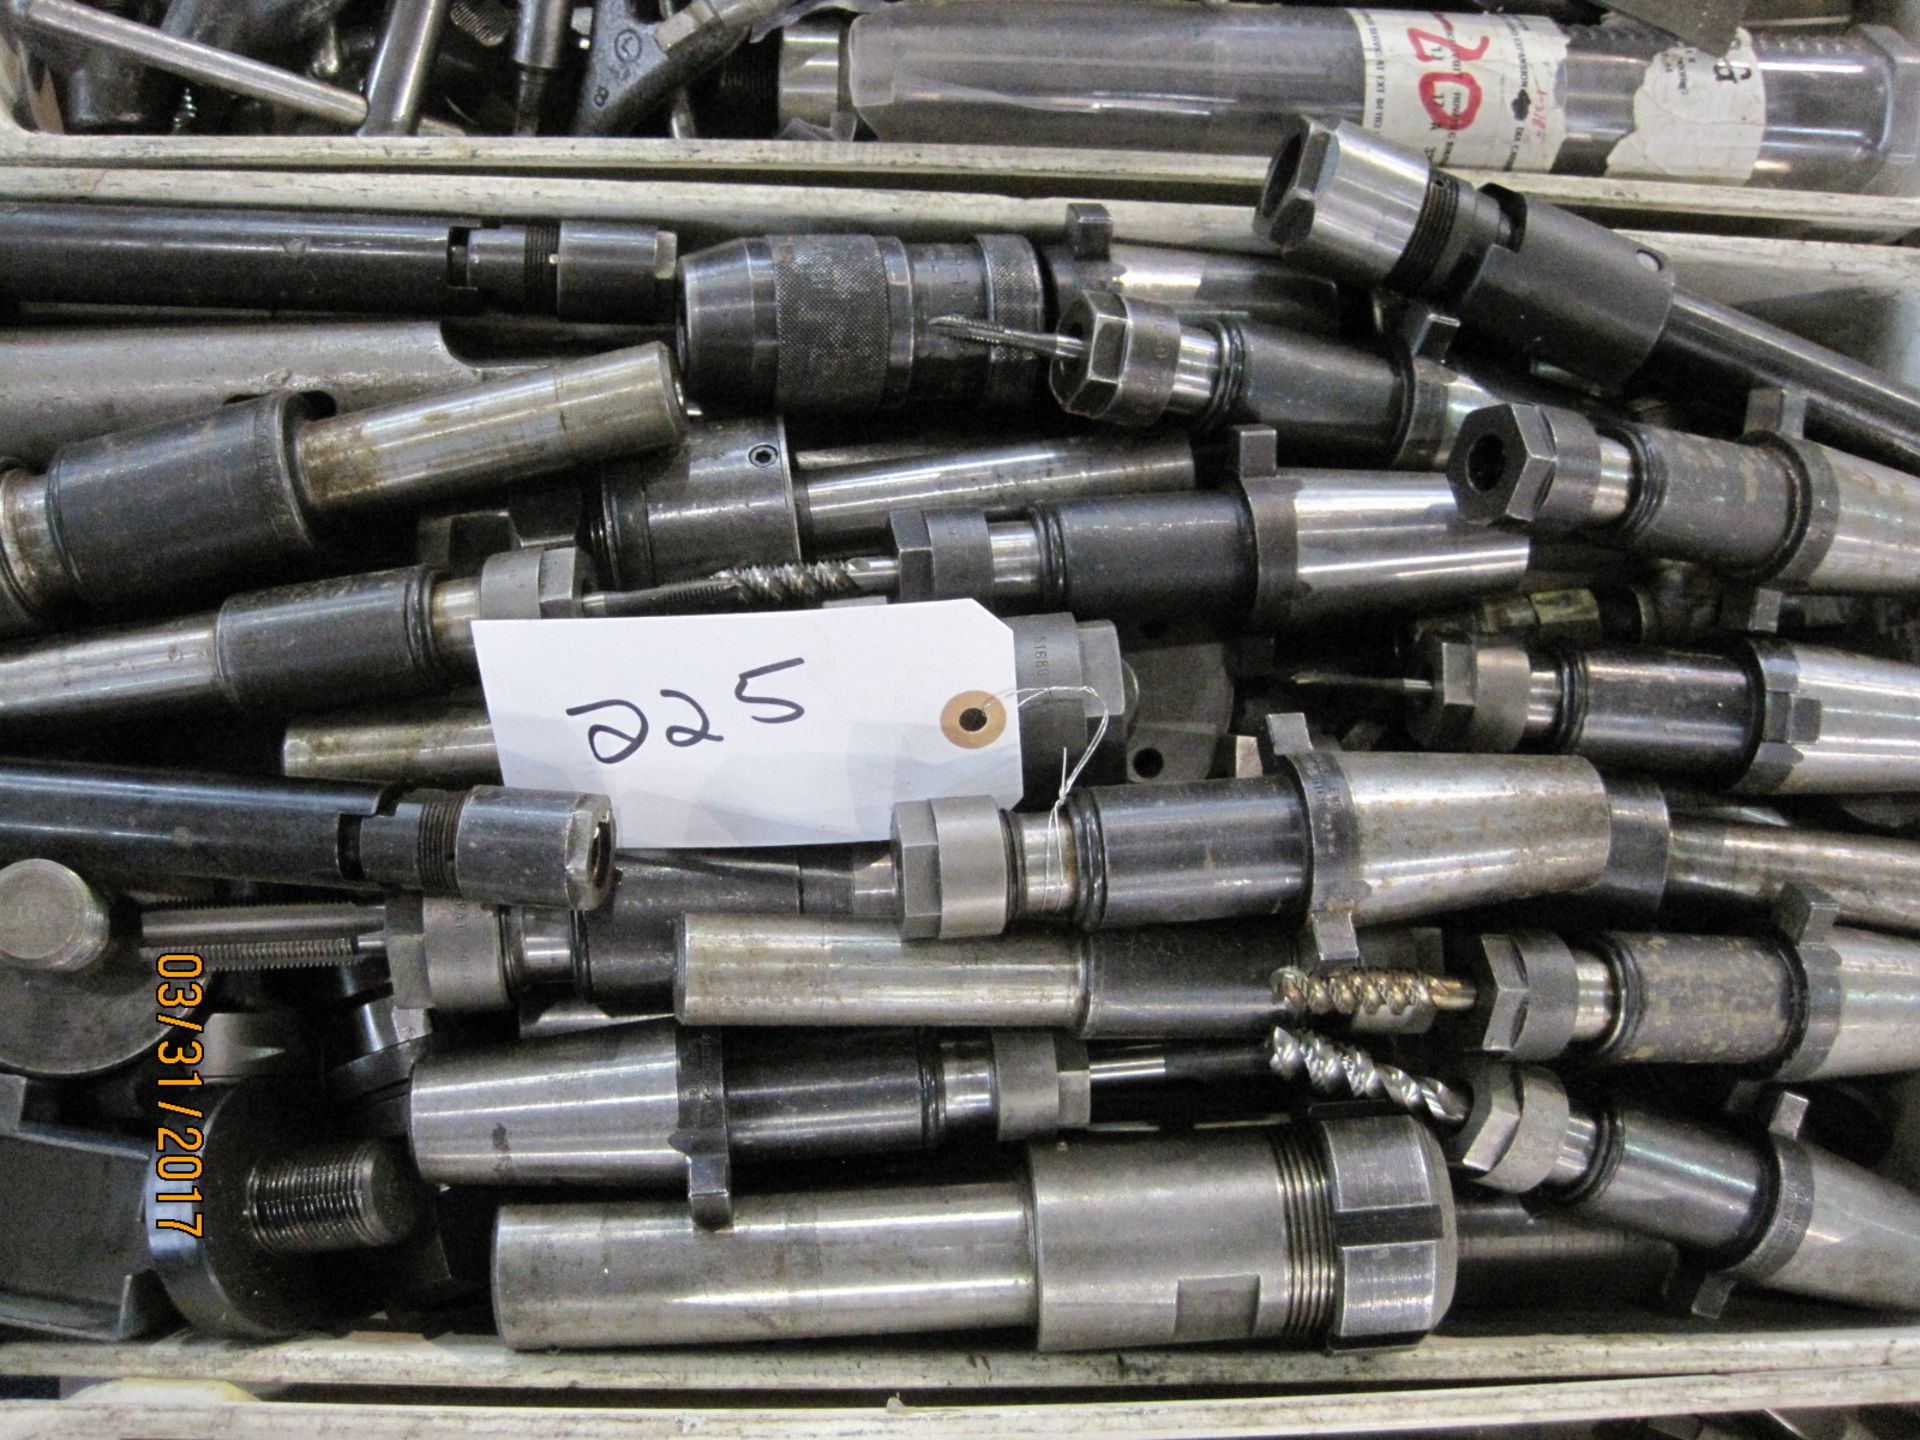 Assorted tooling and holders